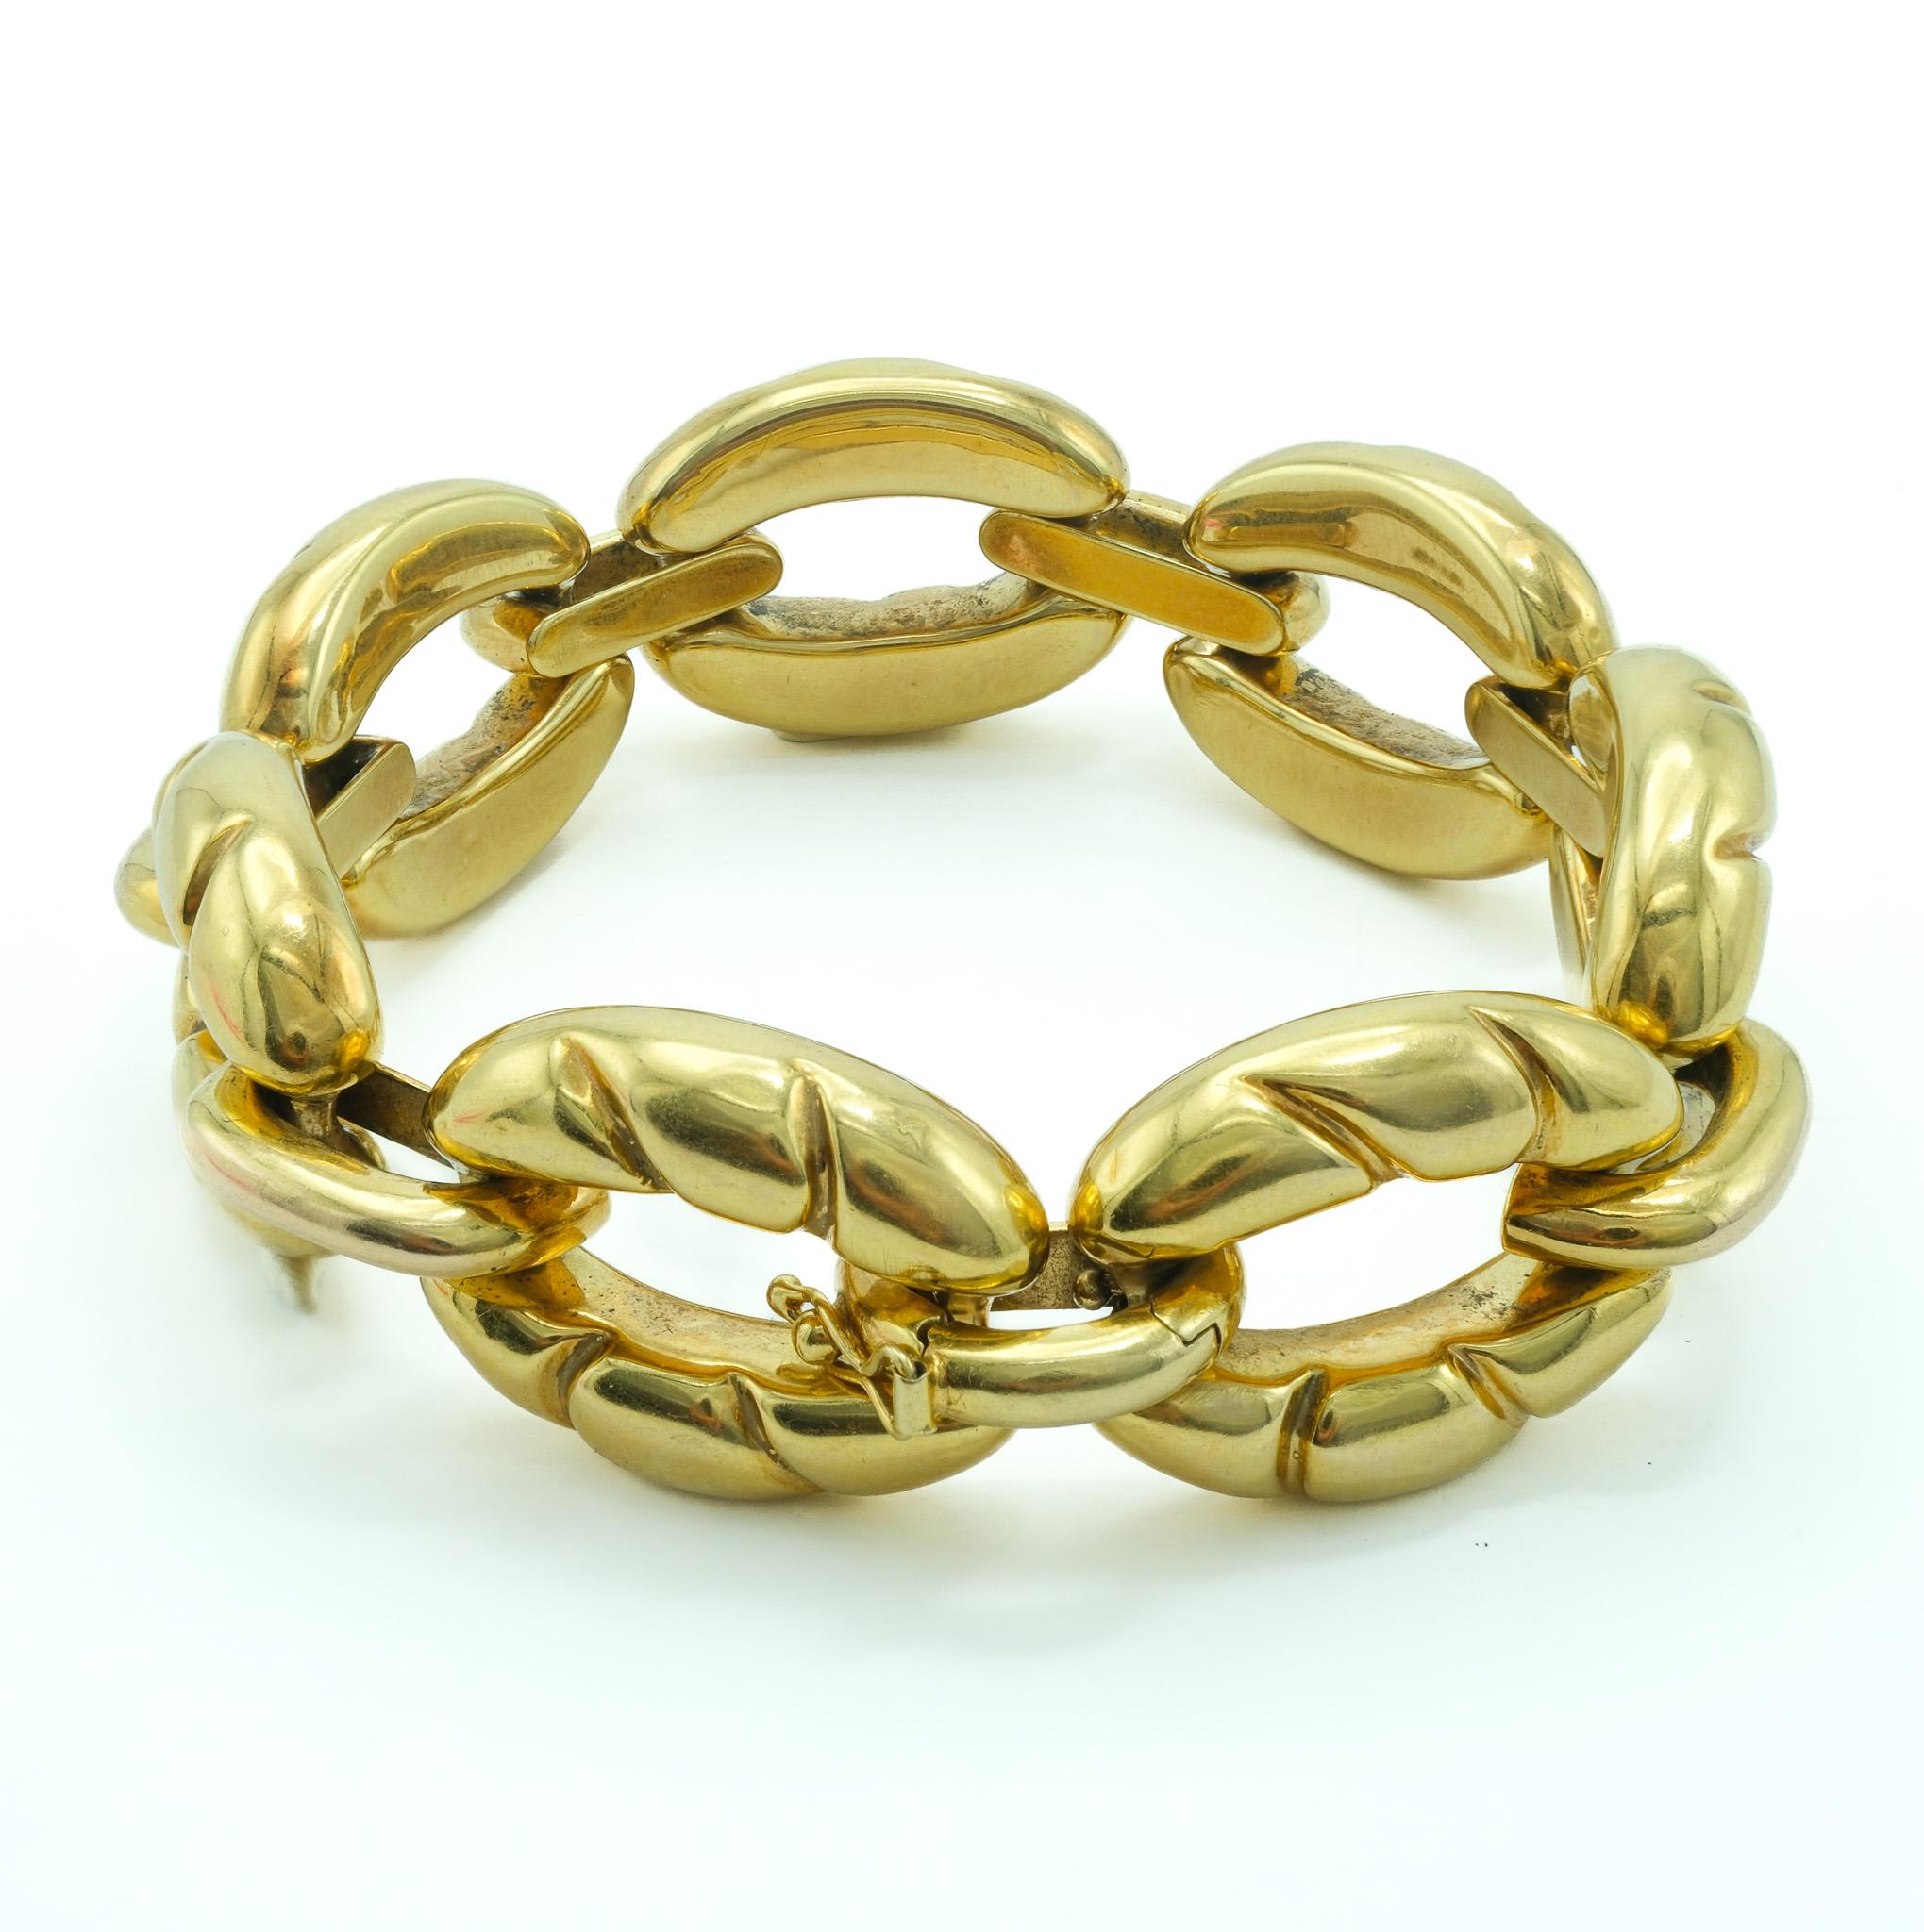 A testament to fine Italian craftsmanship, our 18 karat yellow gold chunky link bracelet is an exquisite statement piece that offers opulence and bold. 

Meticulously crafted, this bracelet is infused with character as each link is hand made and